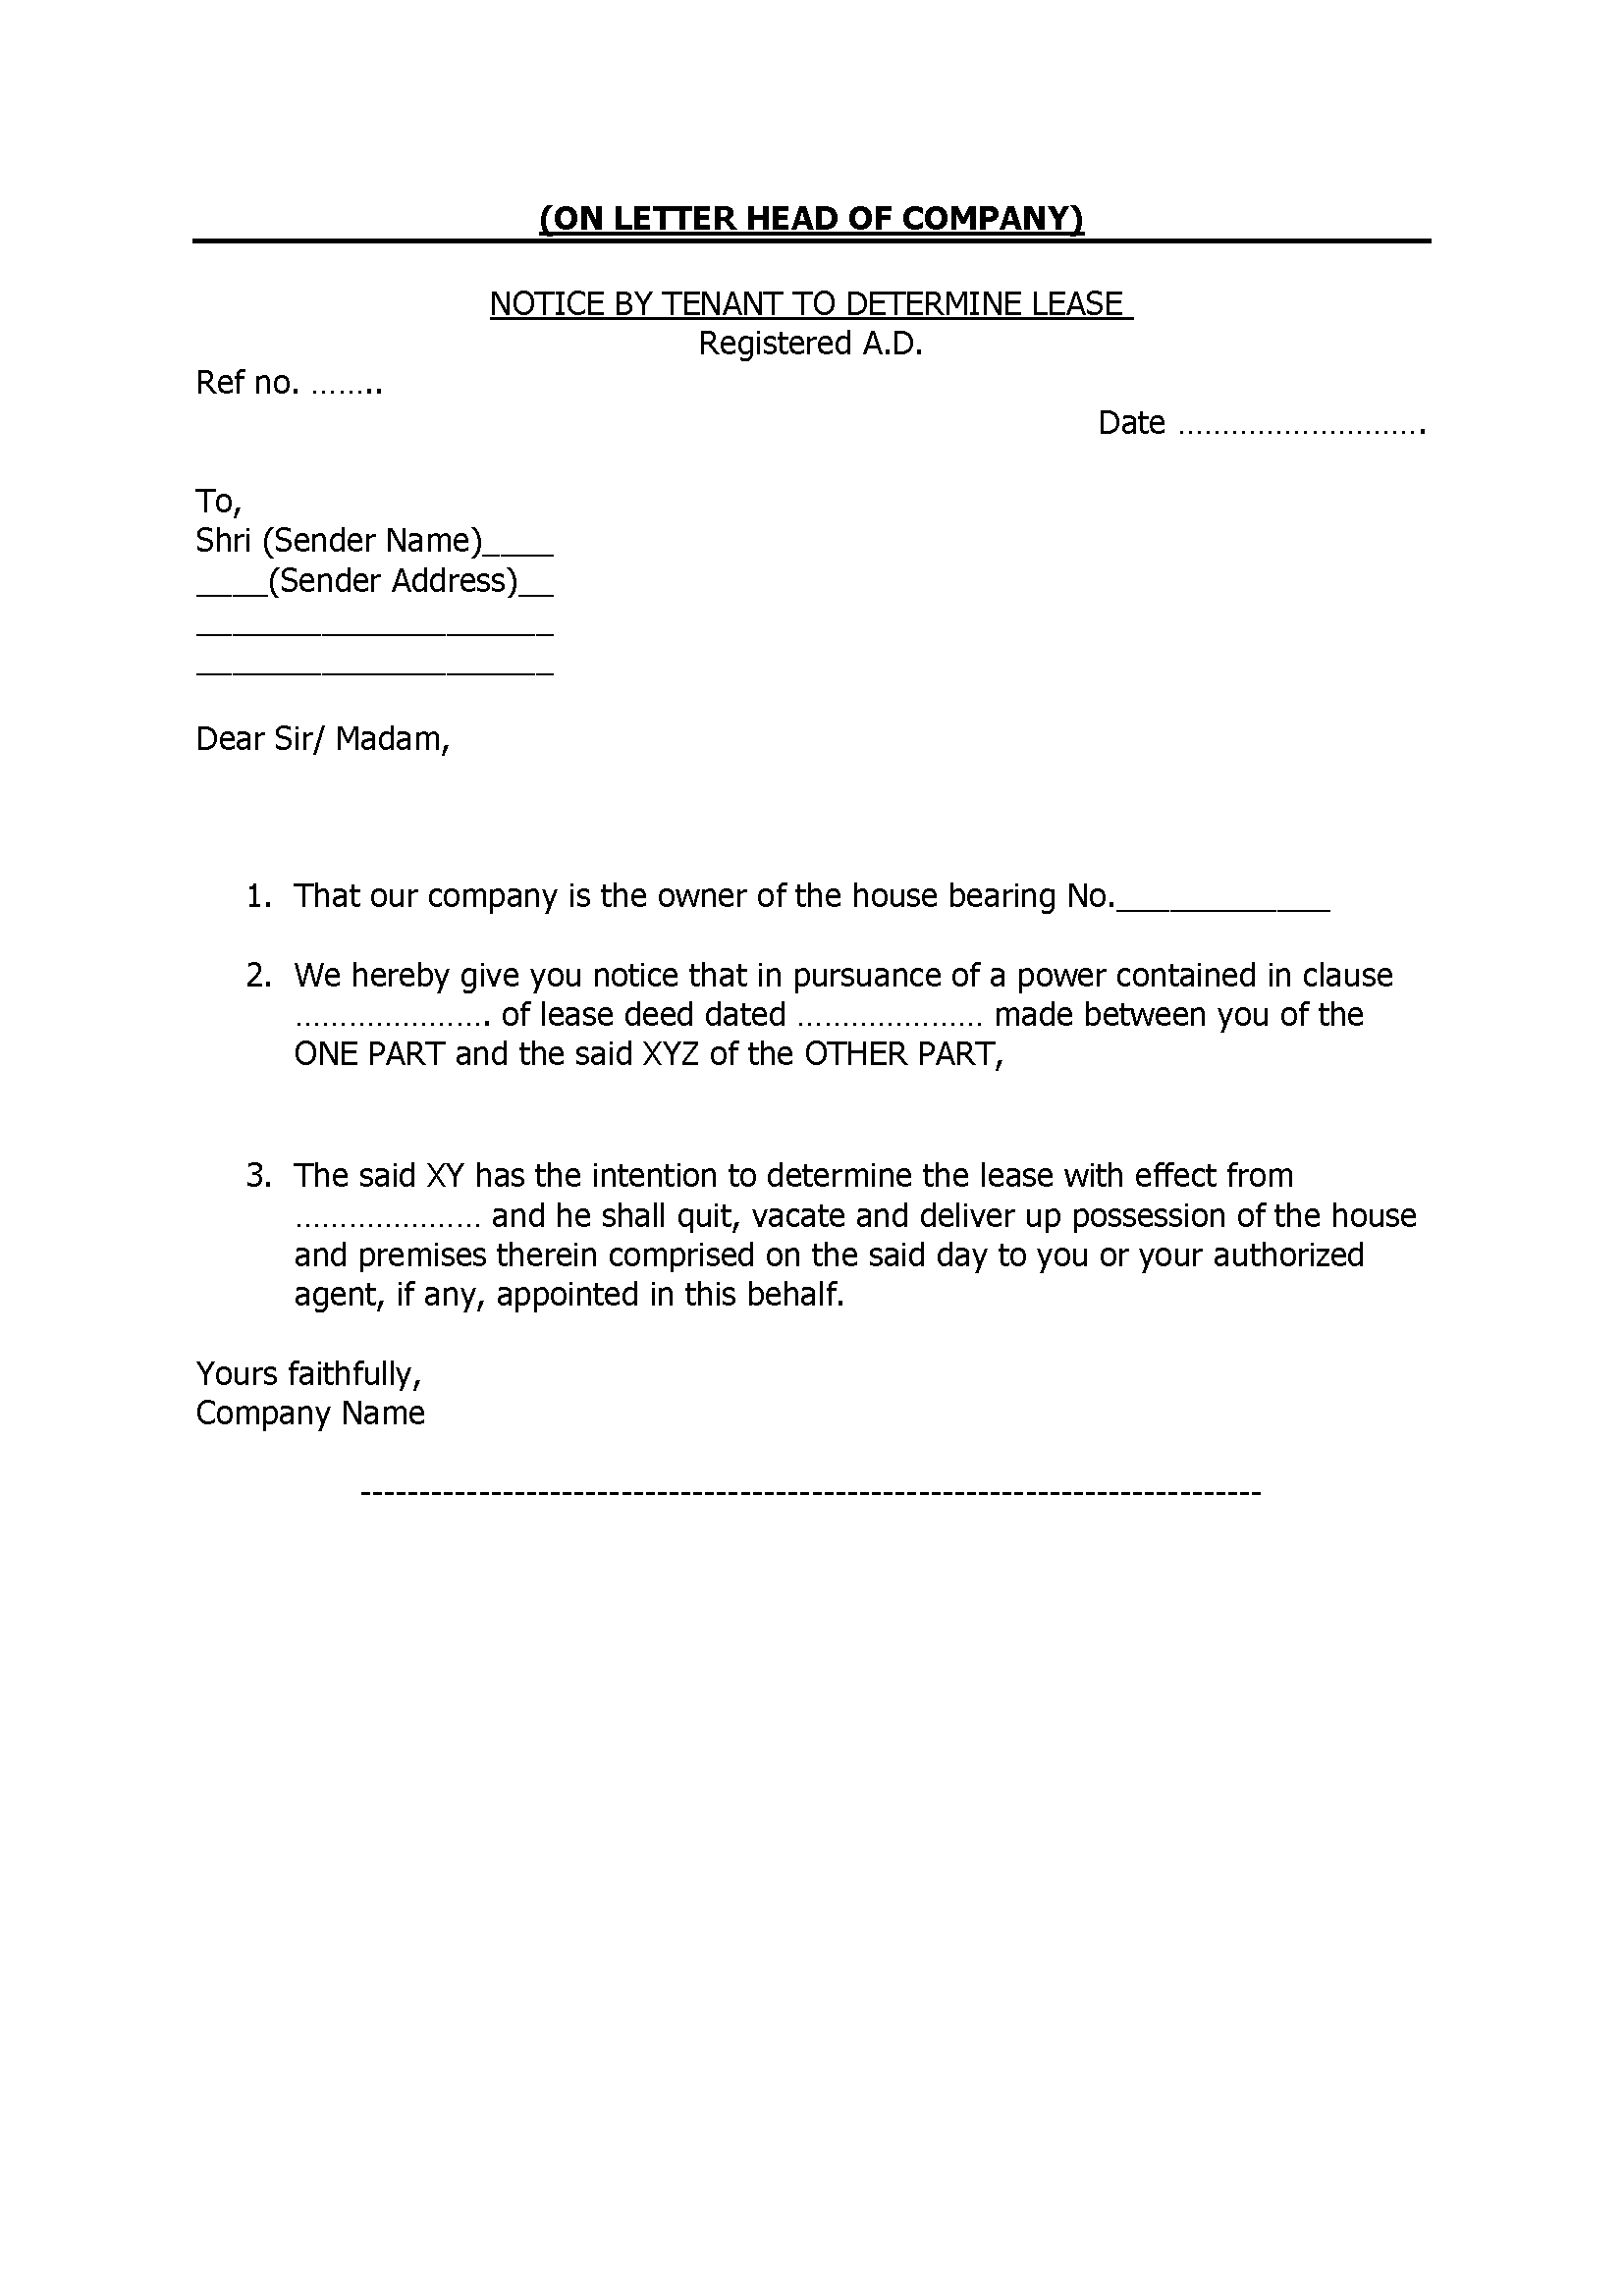 Notice by Tenant to Determine Lease